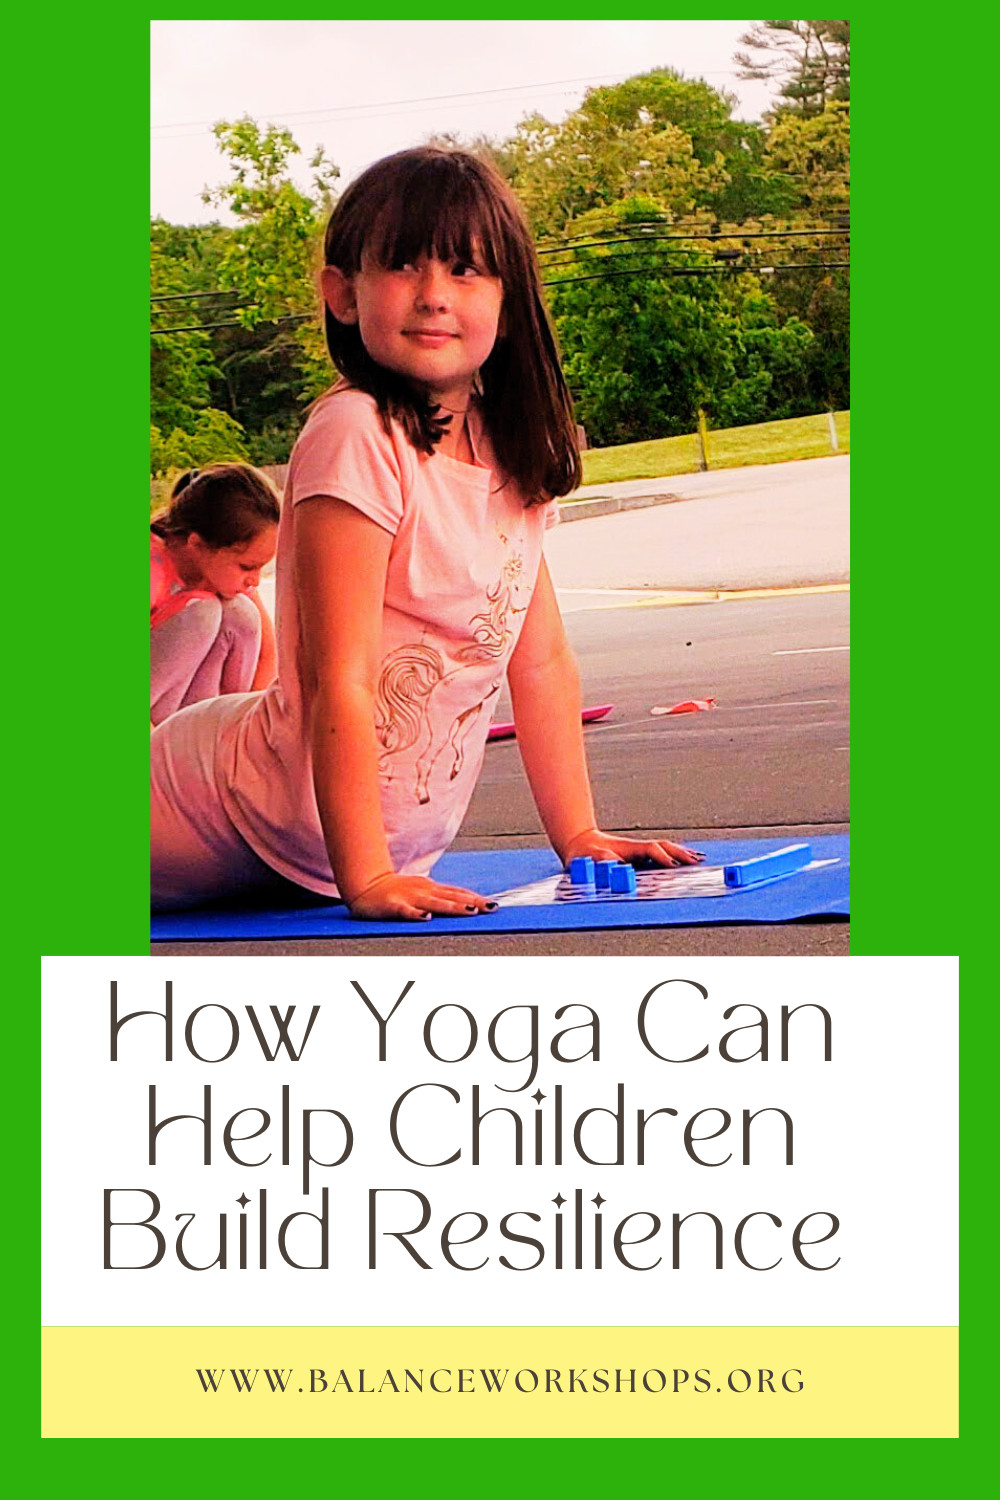 How Yoga Can Help Children Build Resilience